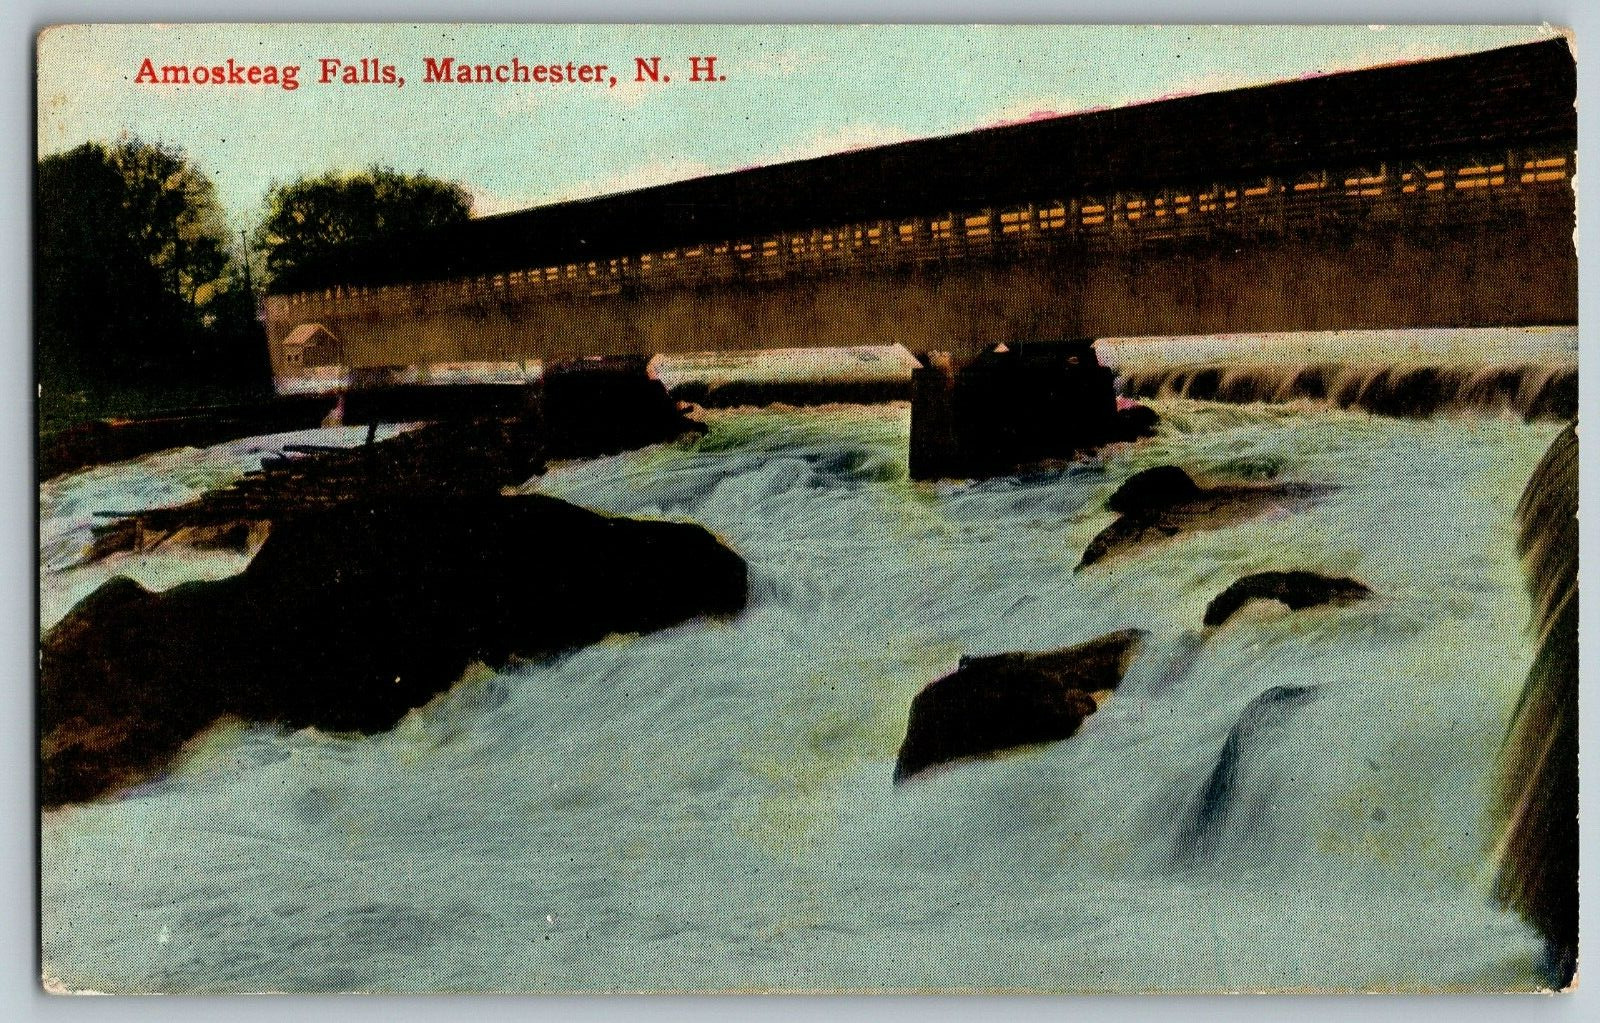 Manchester, New Hampshire - Amoskeag Falls - Vintage Postcard - Unposted